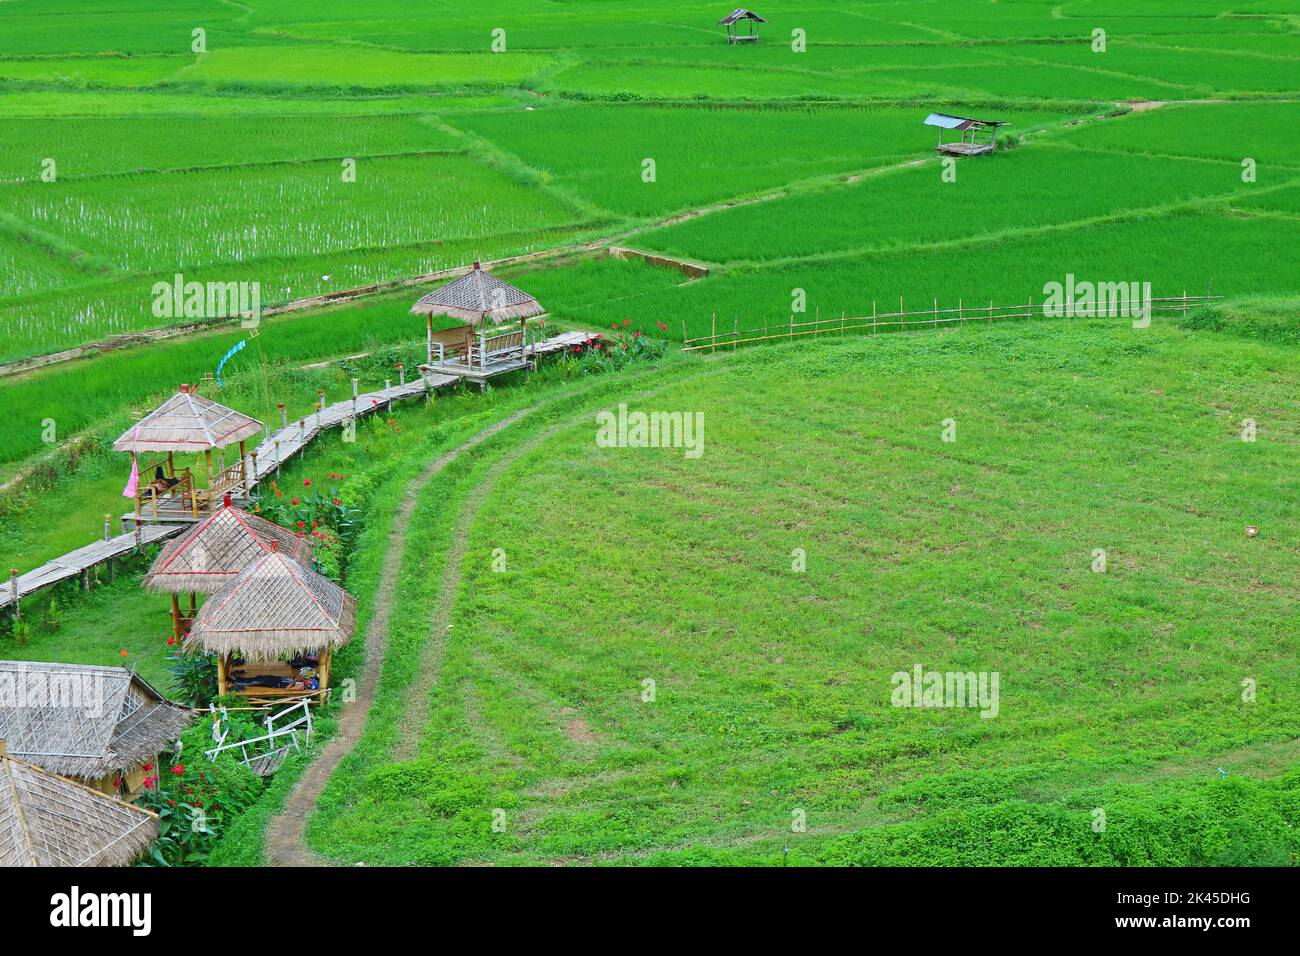 Vibrant green paddy field with group of rustic style pavilions in Norther Region of Thailand Stock Photo